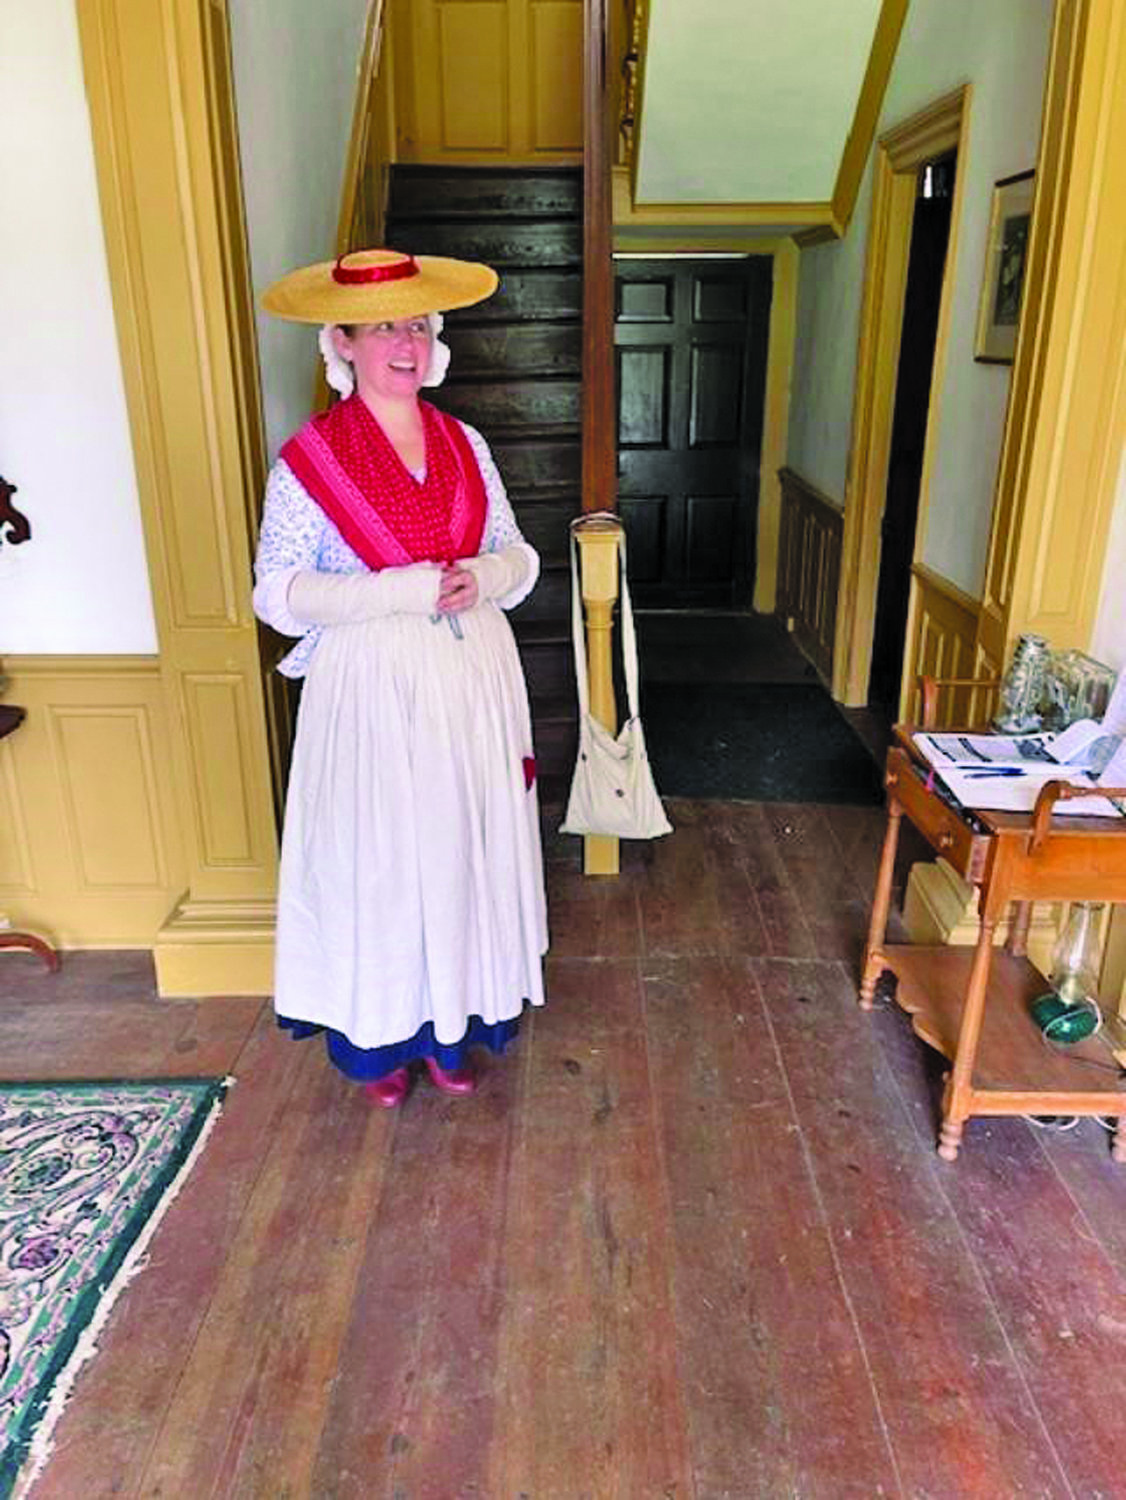 Christine Roca, a volunteer, conducts tours of the summer mansion once owned by Durham's ironmaster, Bucks County's only signer of the Declaration of Independence.